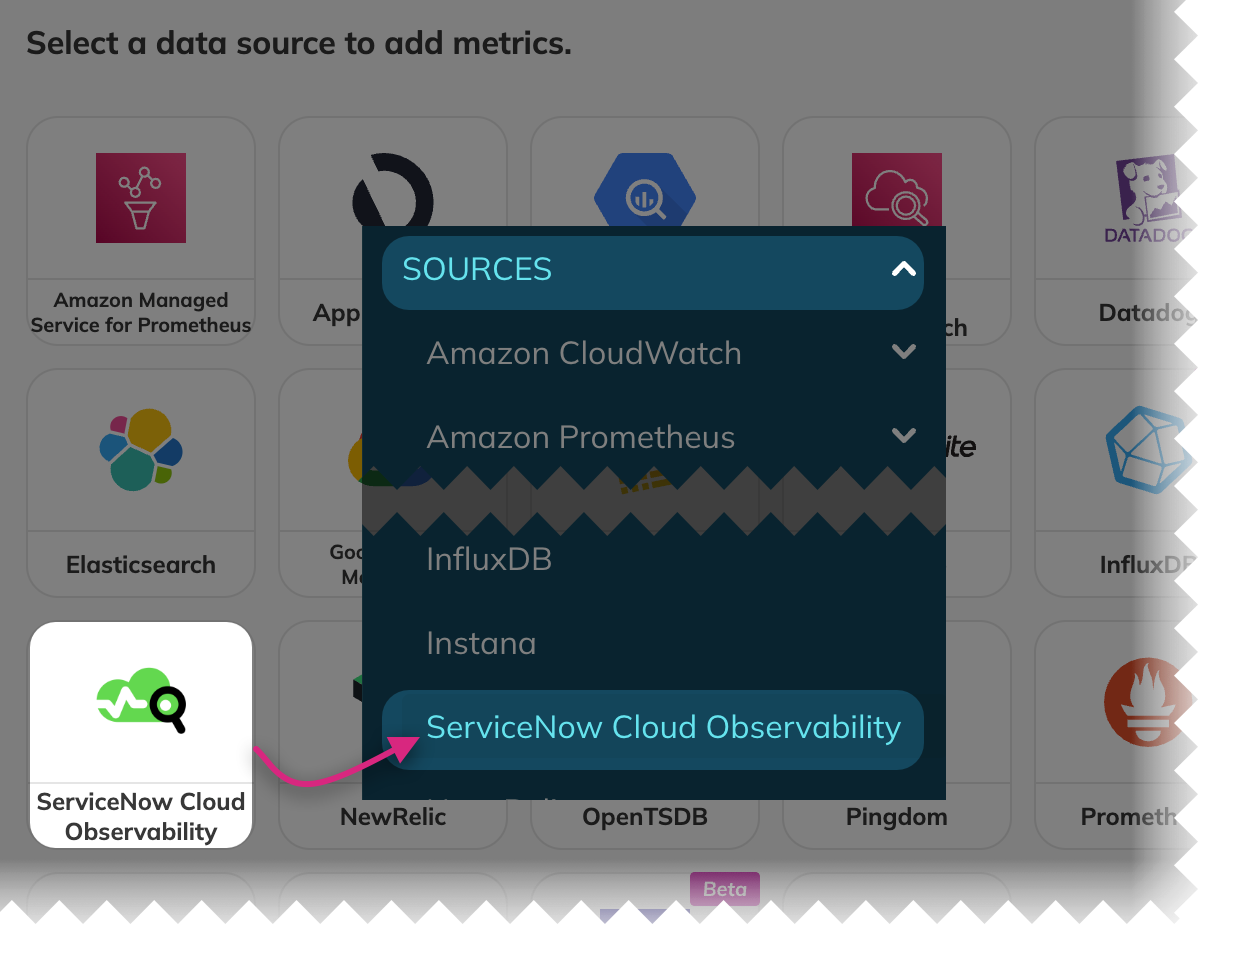 ServiceNow Cloud Observability replaced Lightstep